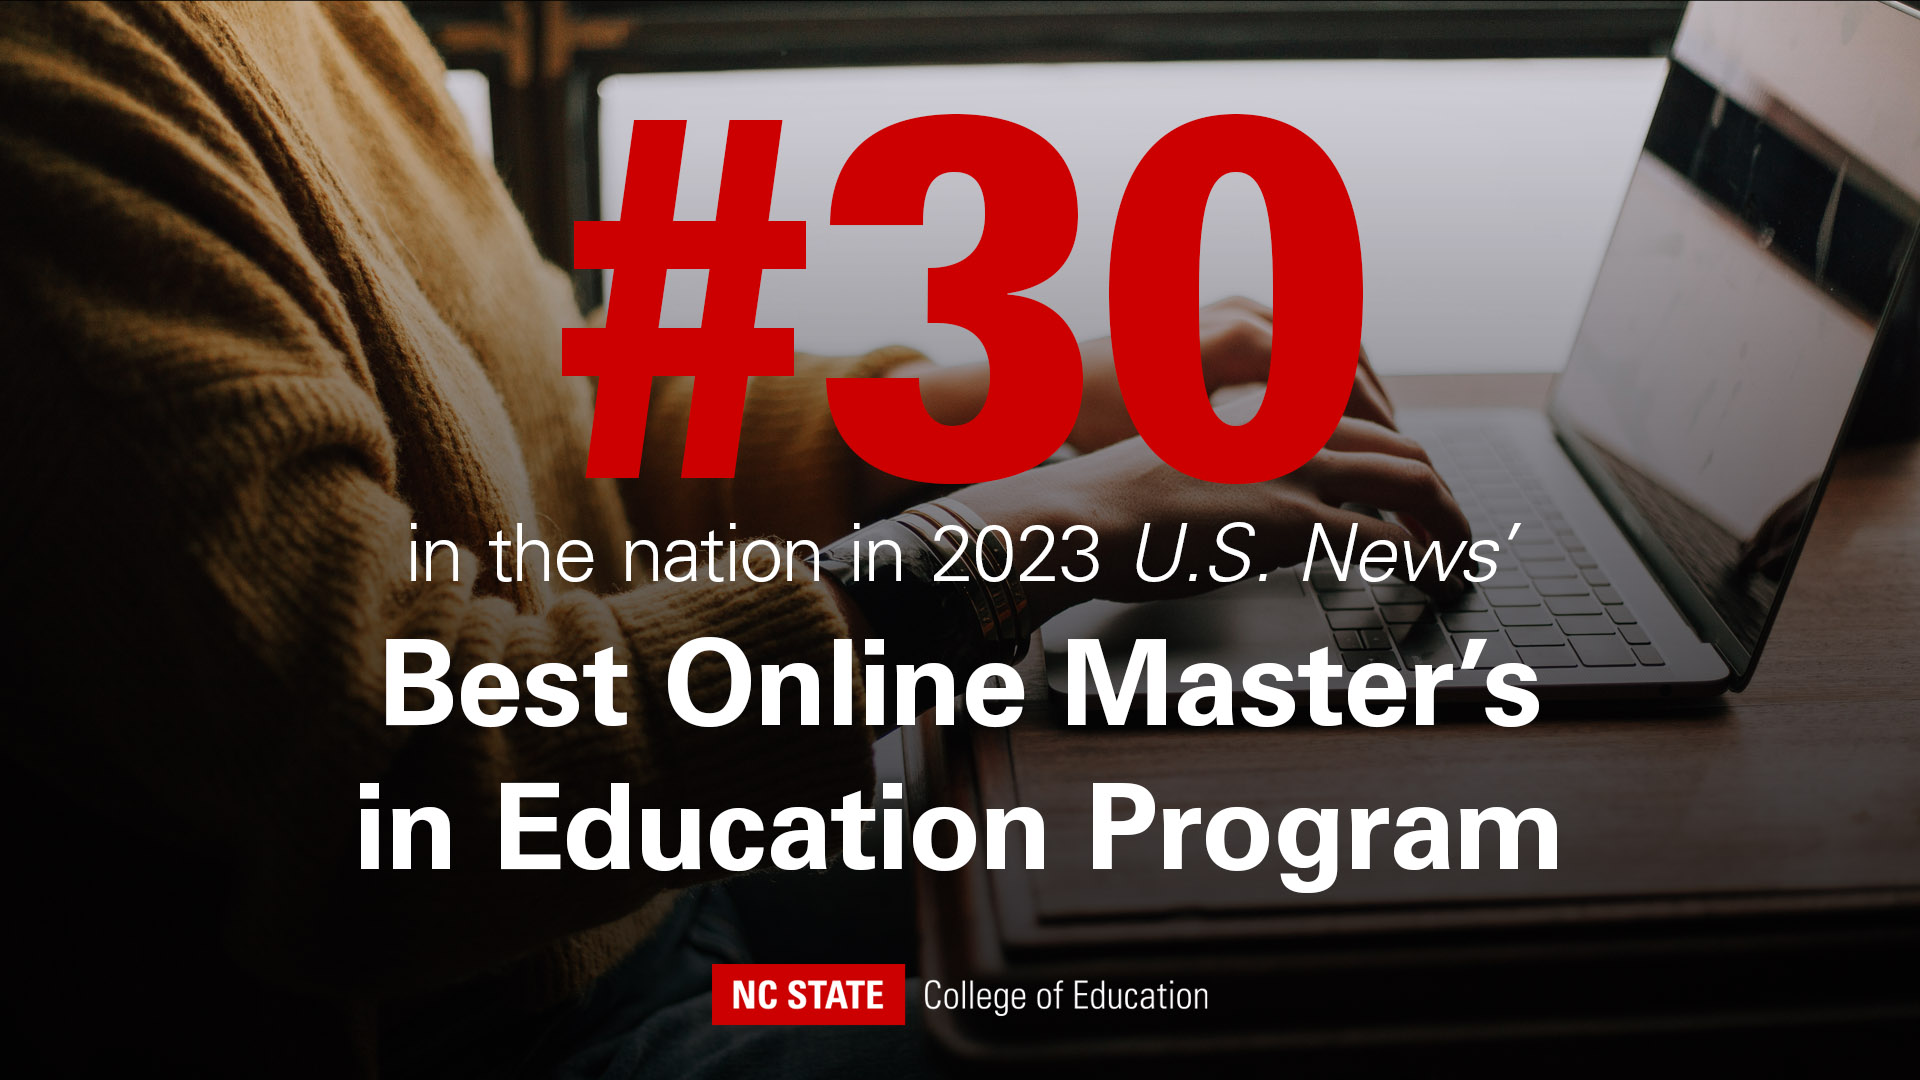 College of Education ranked #30 Beset Online Master's Program in the nation